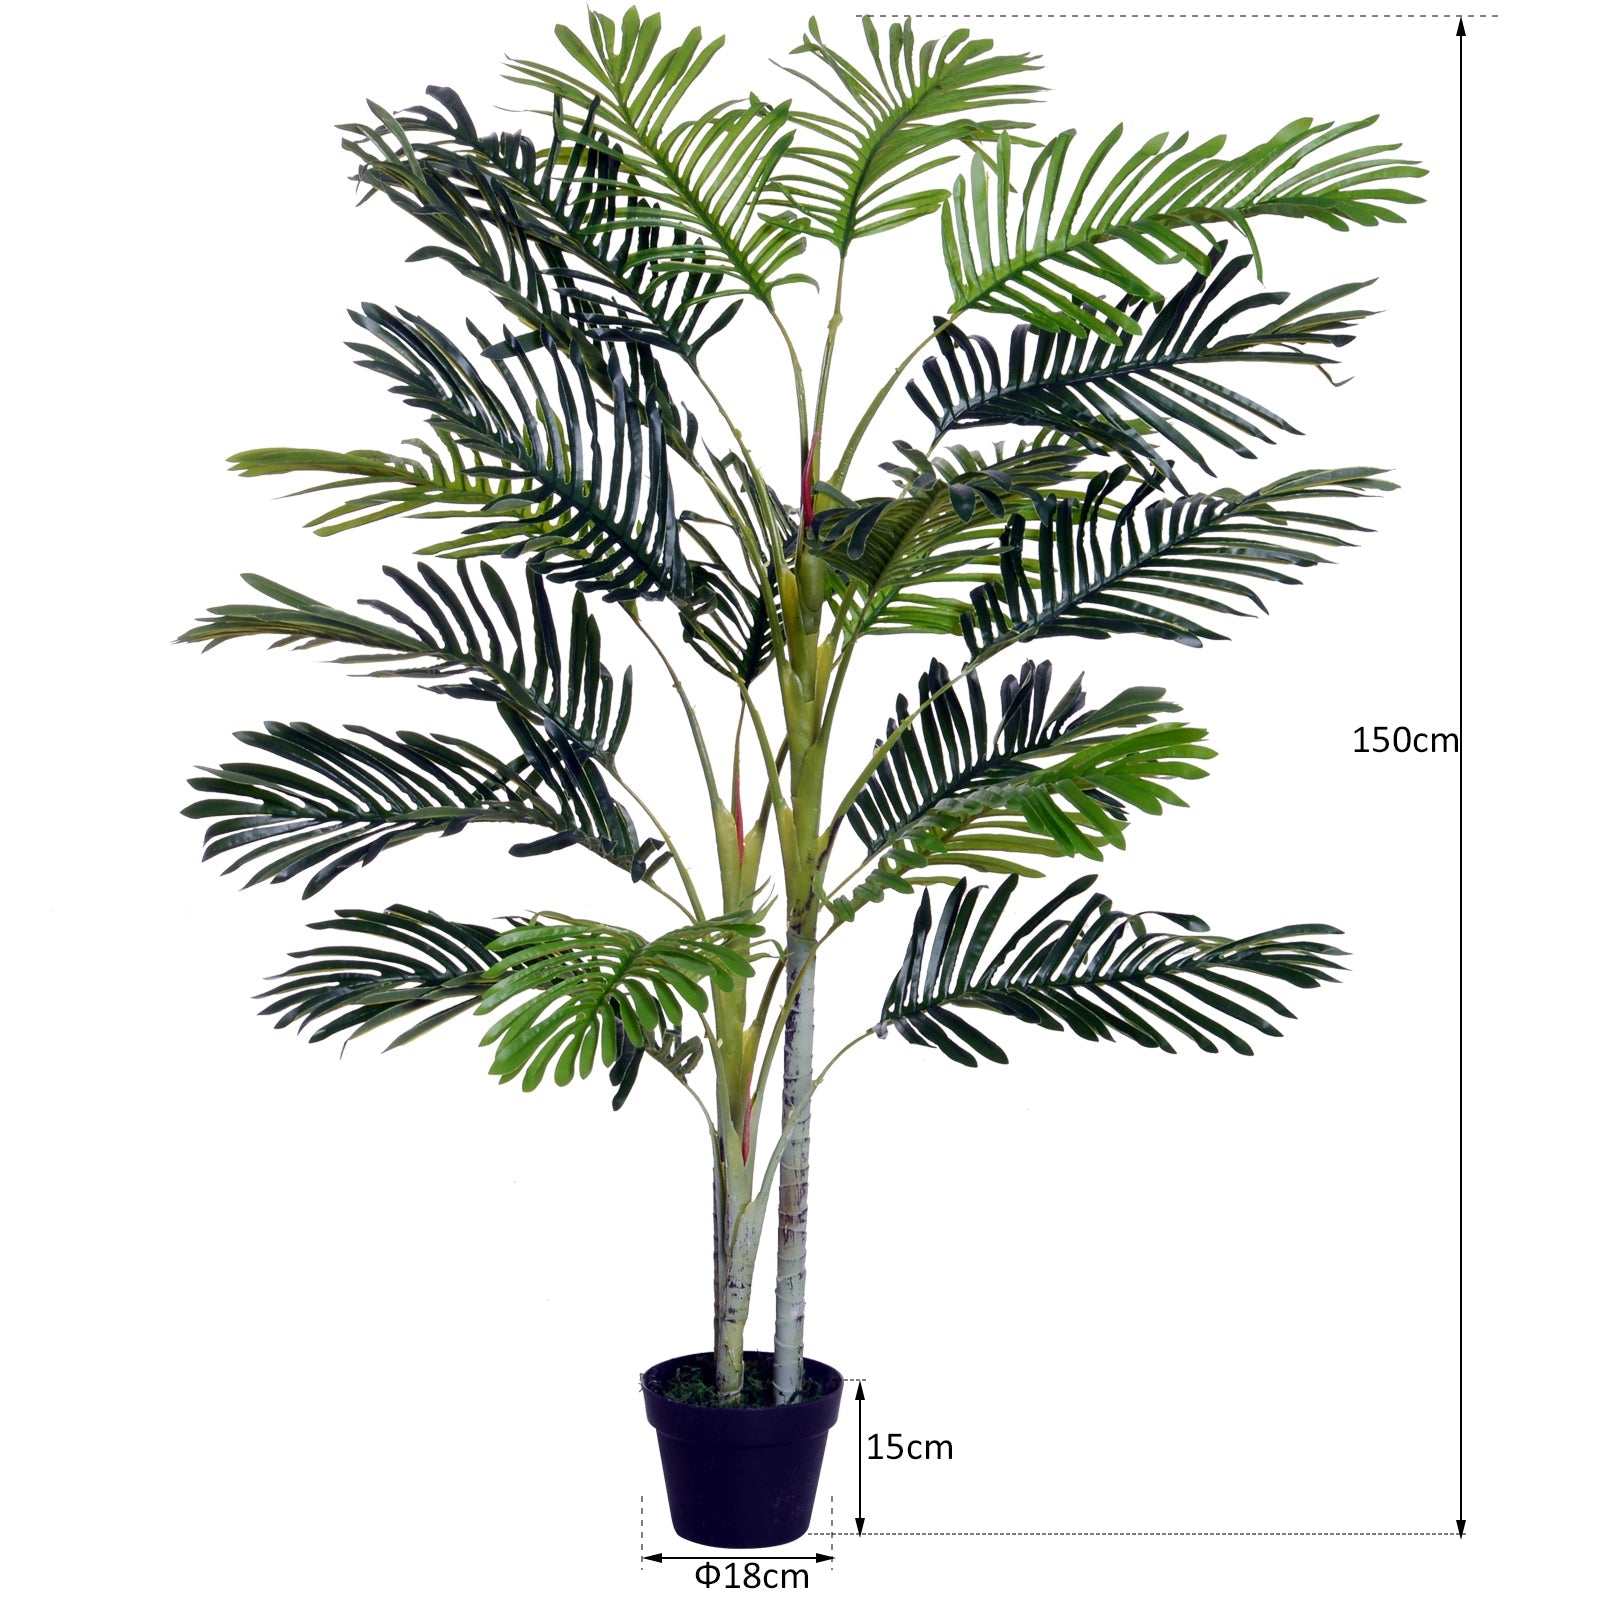 150cm(5ft) Artificial Palm Tree Decorative Indoor Faux Green Plant w/Leaves Home Décor Tropical Potted Home Office-2